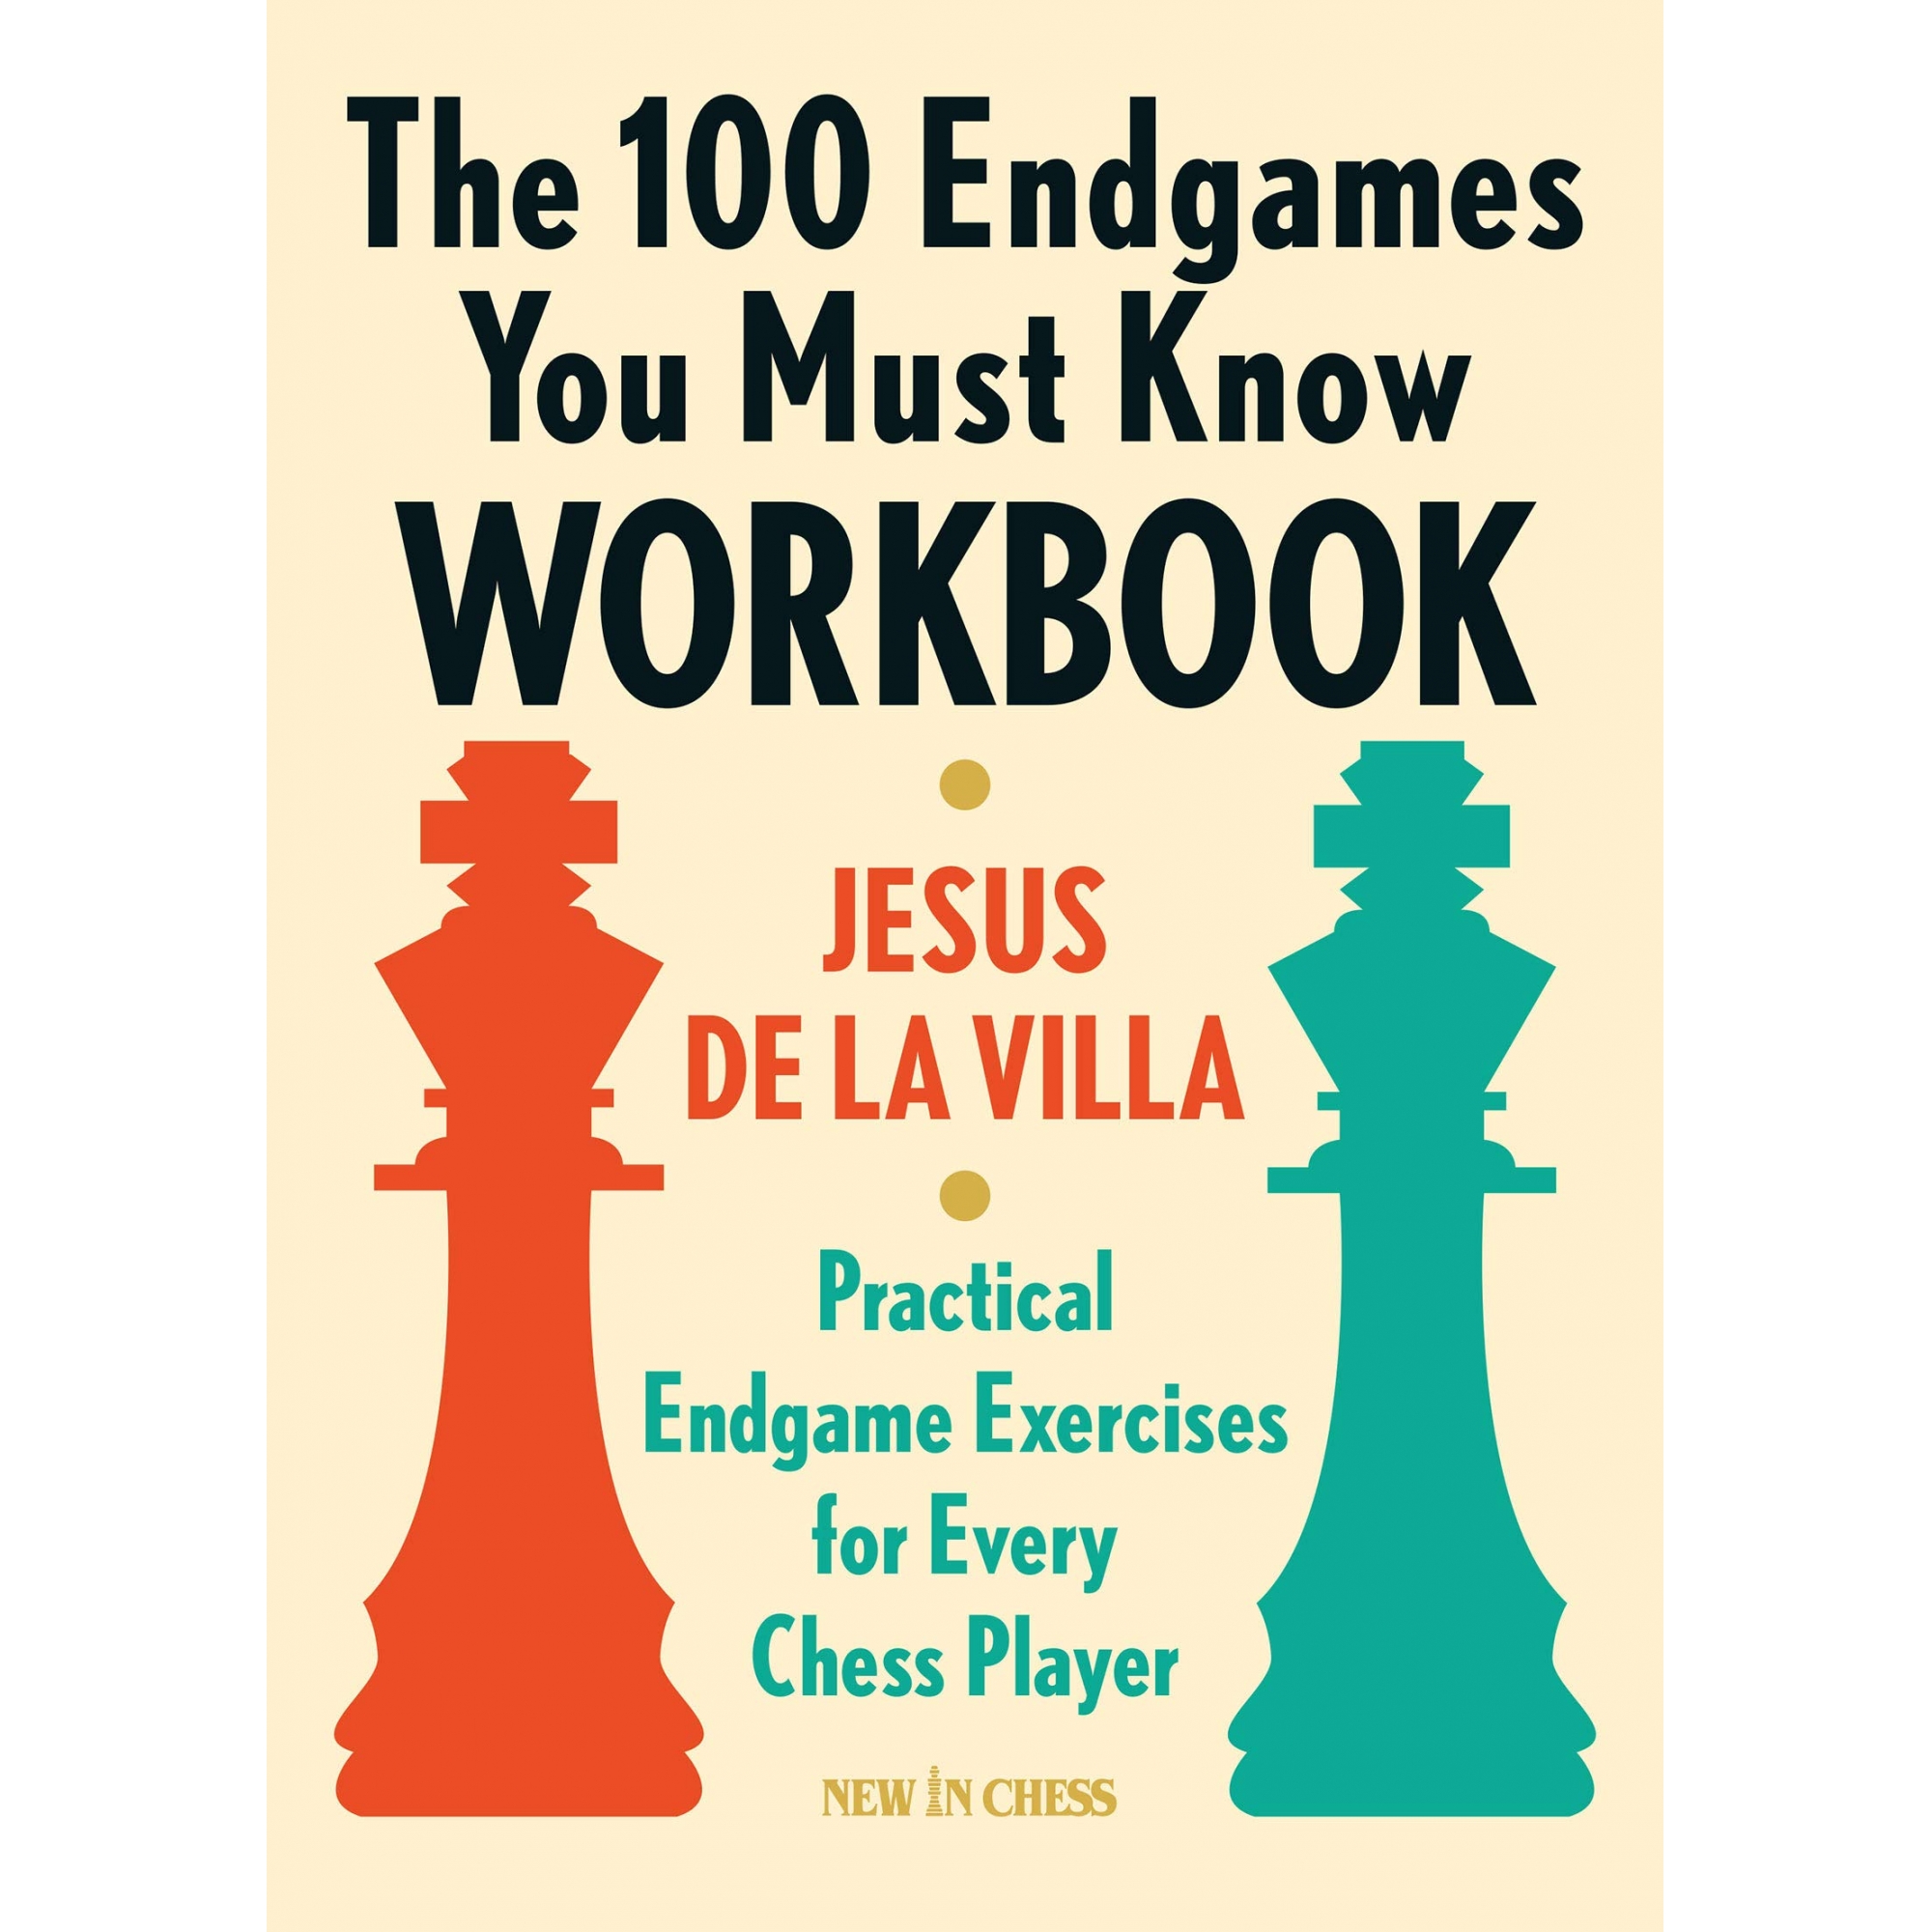 The 100 endgames you must know - Workbook